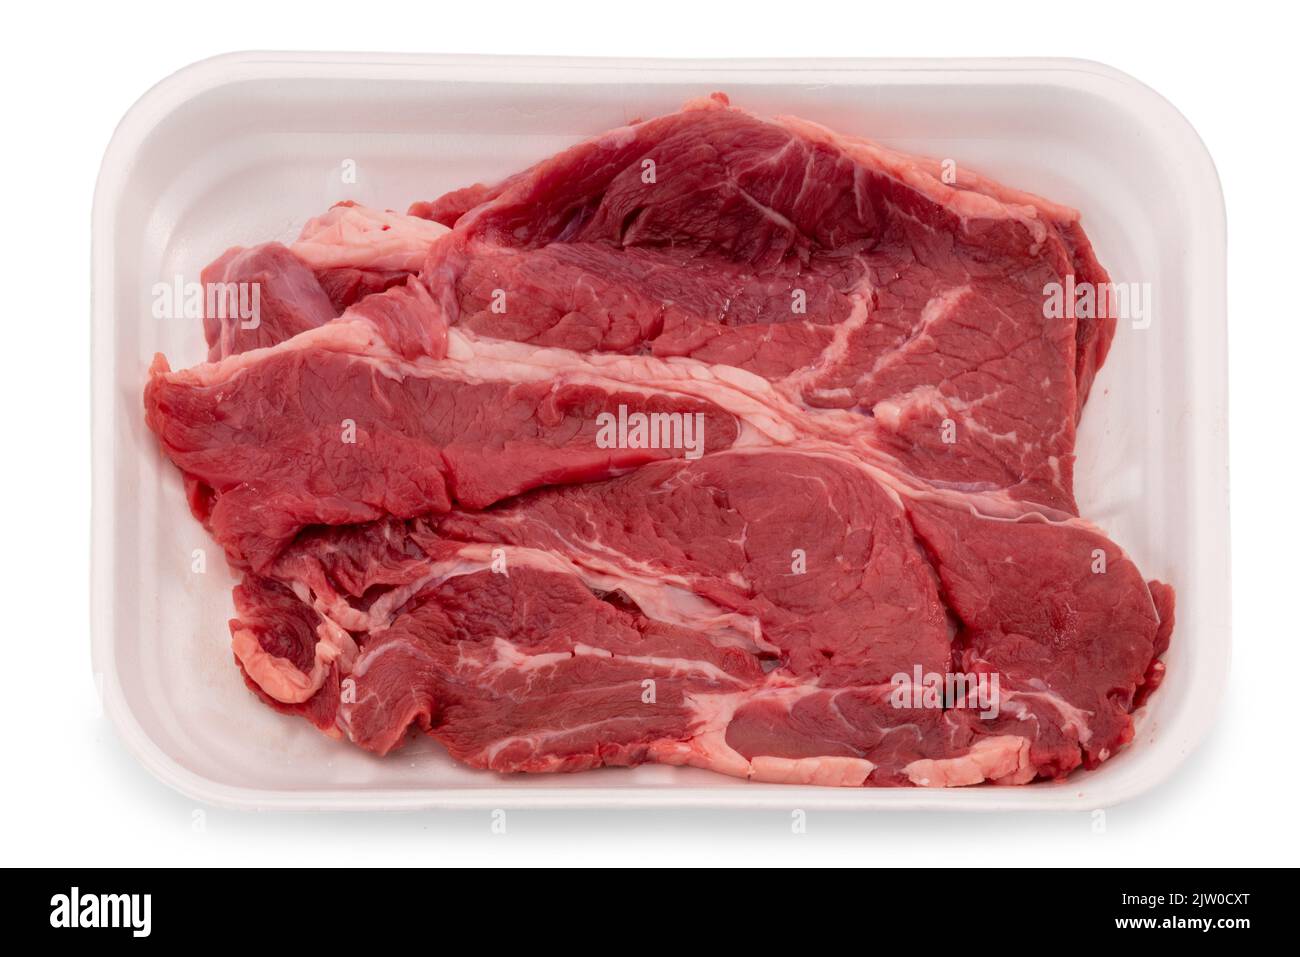 Raw beef steak in styrofoam food tray isolated on white, clipping path Stock Photo